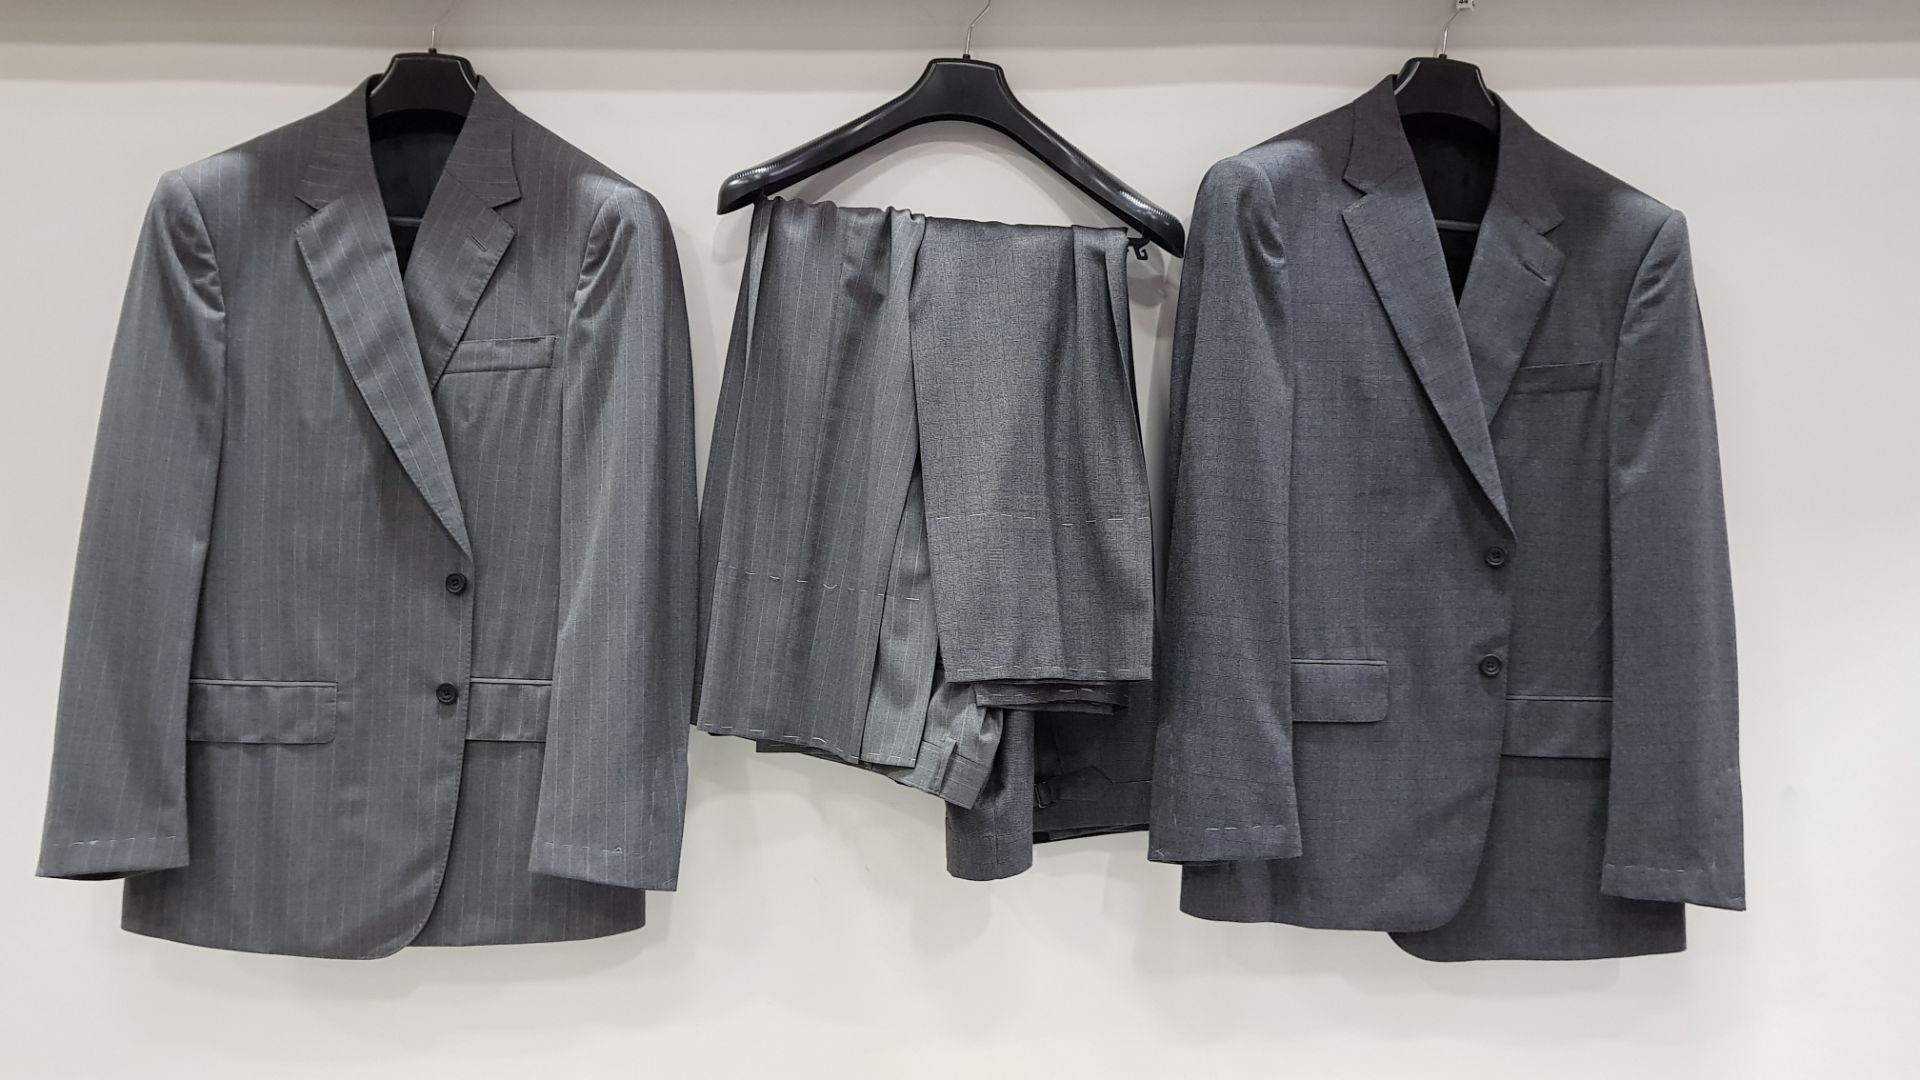 3 X BRAND NEW LUTWYCHE HAND TAILORED DARK GREY PINSTRIPED AND PATTERNED SUITS SIZE 42R AND 44R (